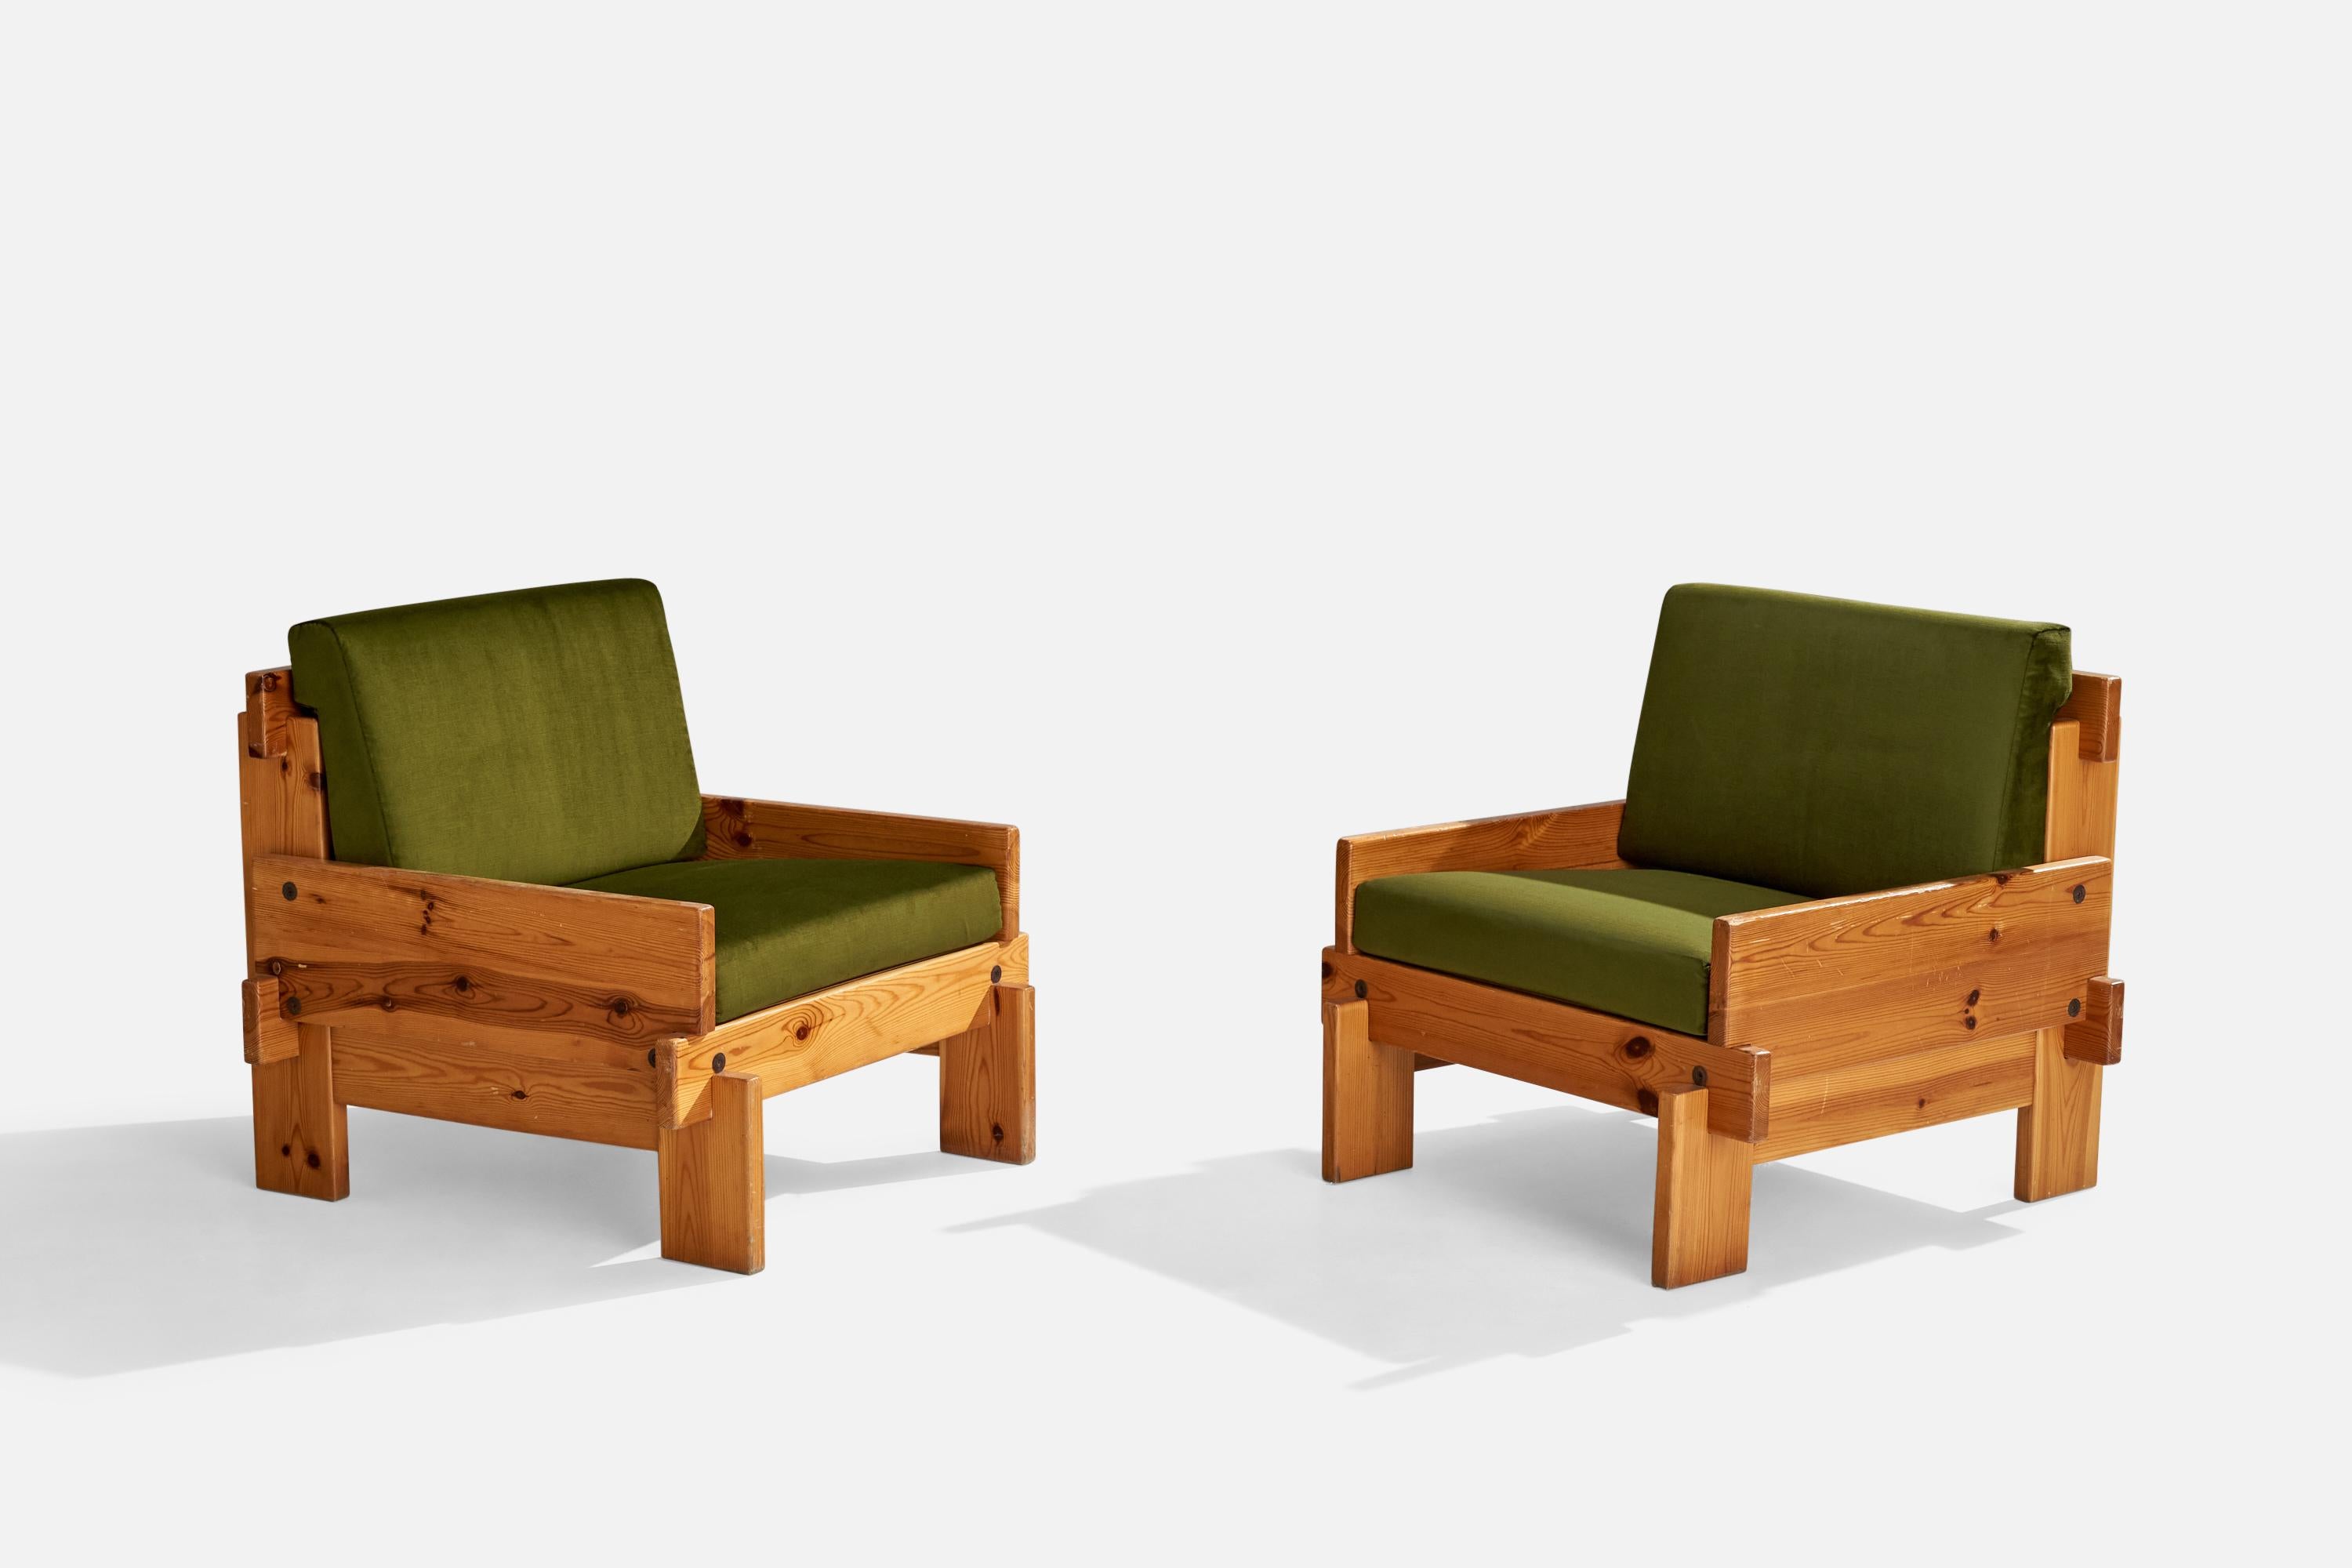 A pair of pine and green velvet lounge chairs designed and produced in Italy, c. 1970s.

Seat height: 16”